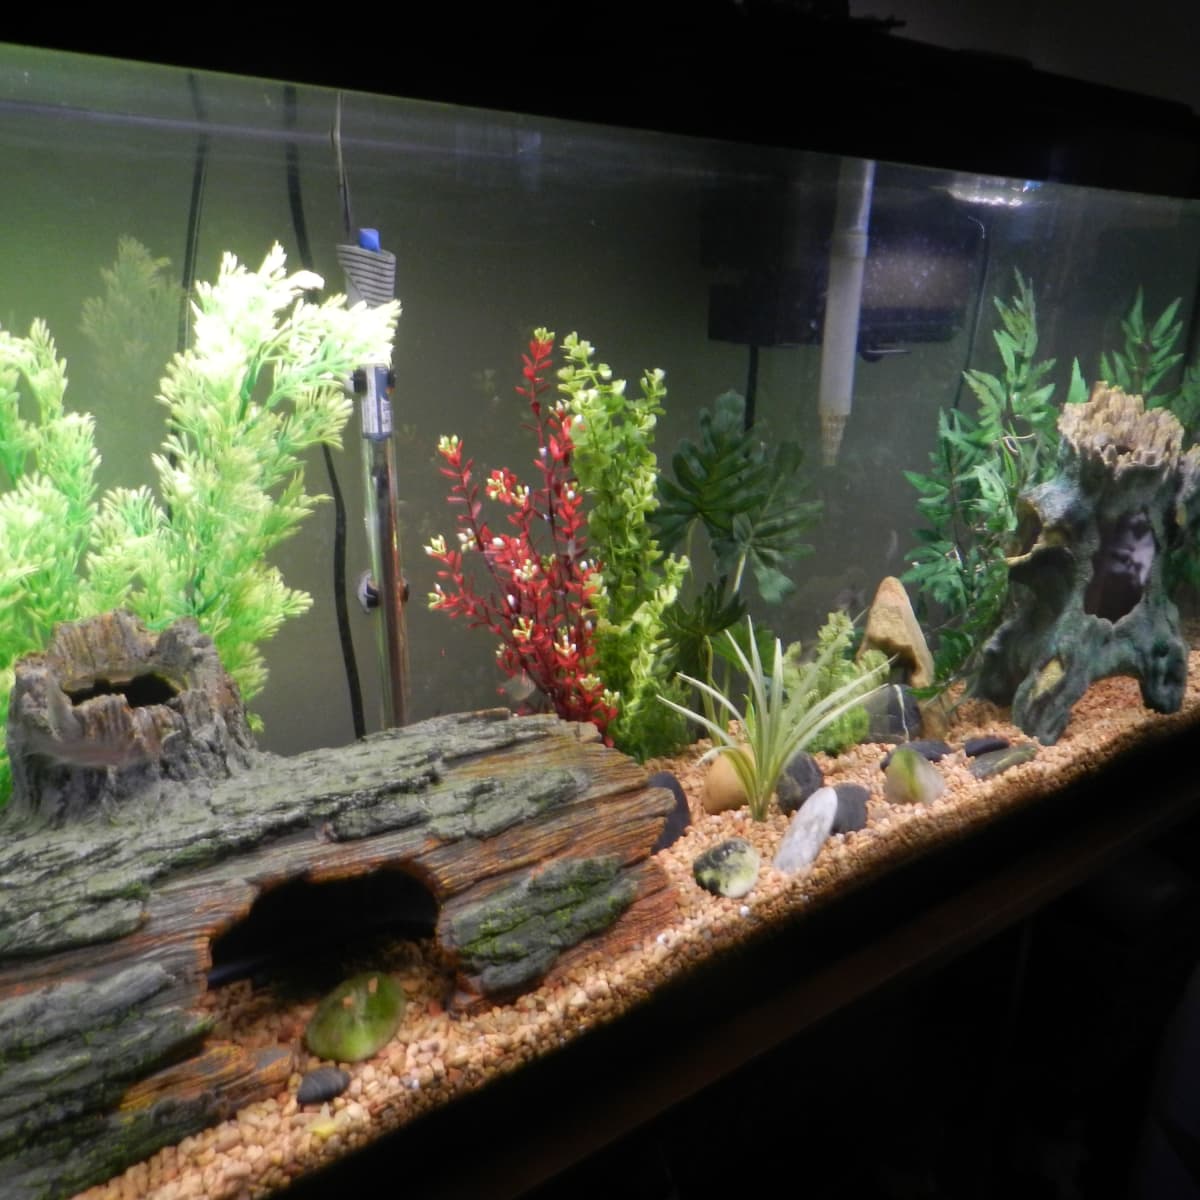 Make Your Own DIY Siphon for Fish Tank Maintenance 